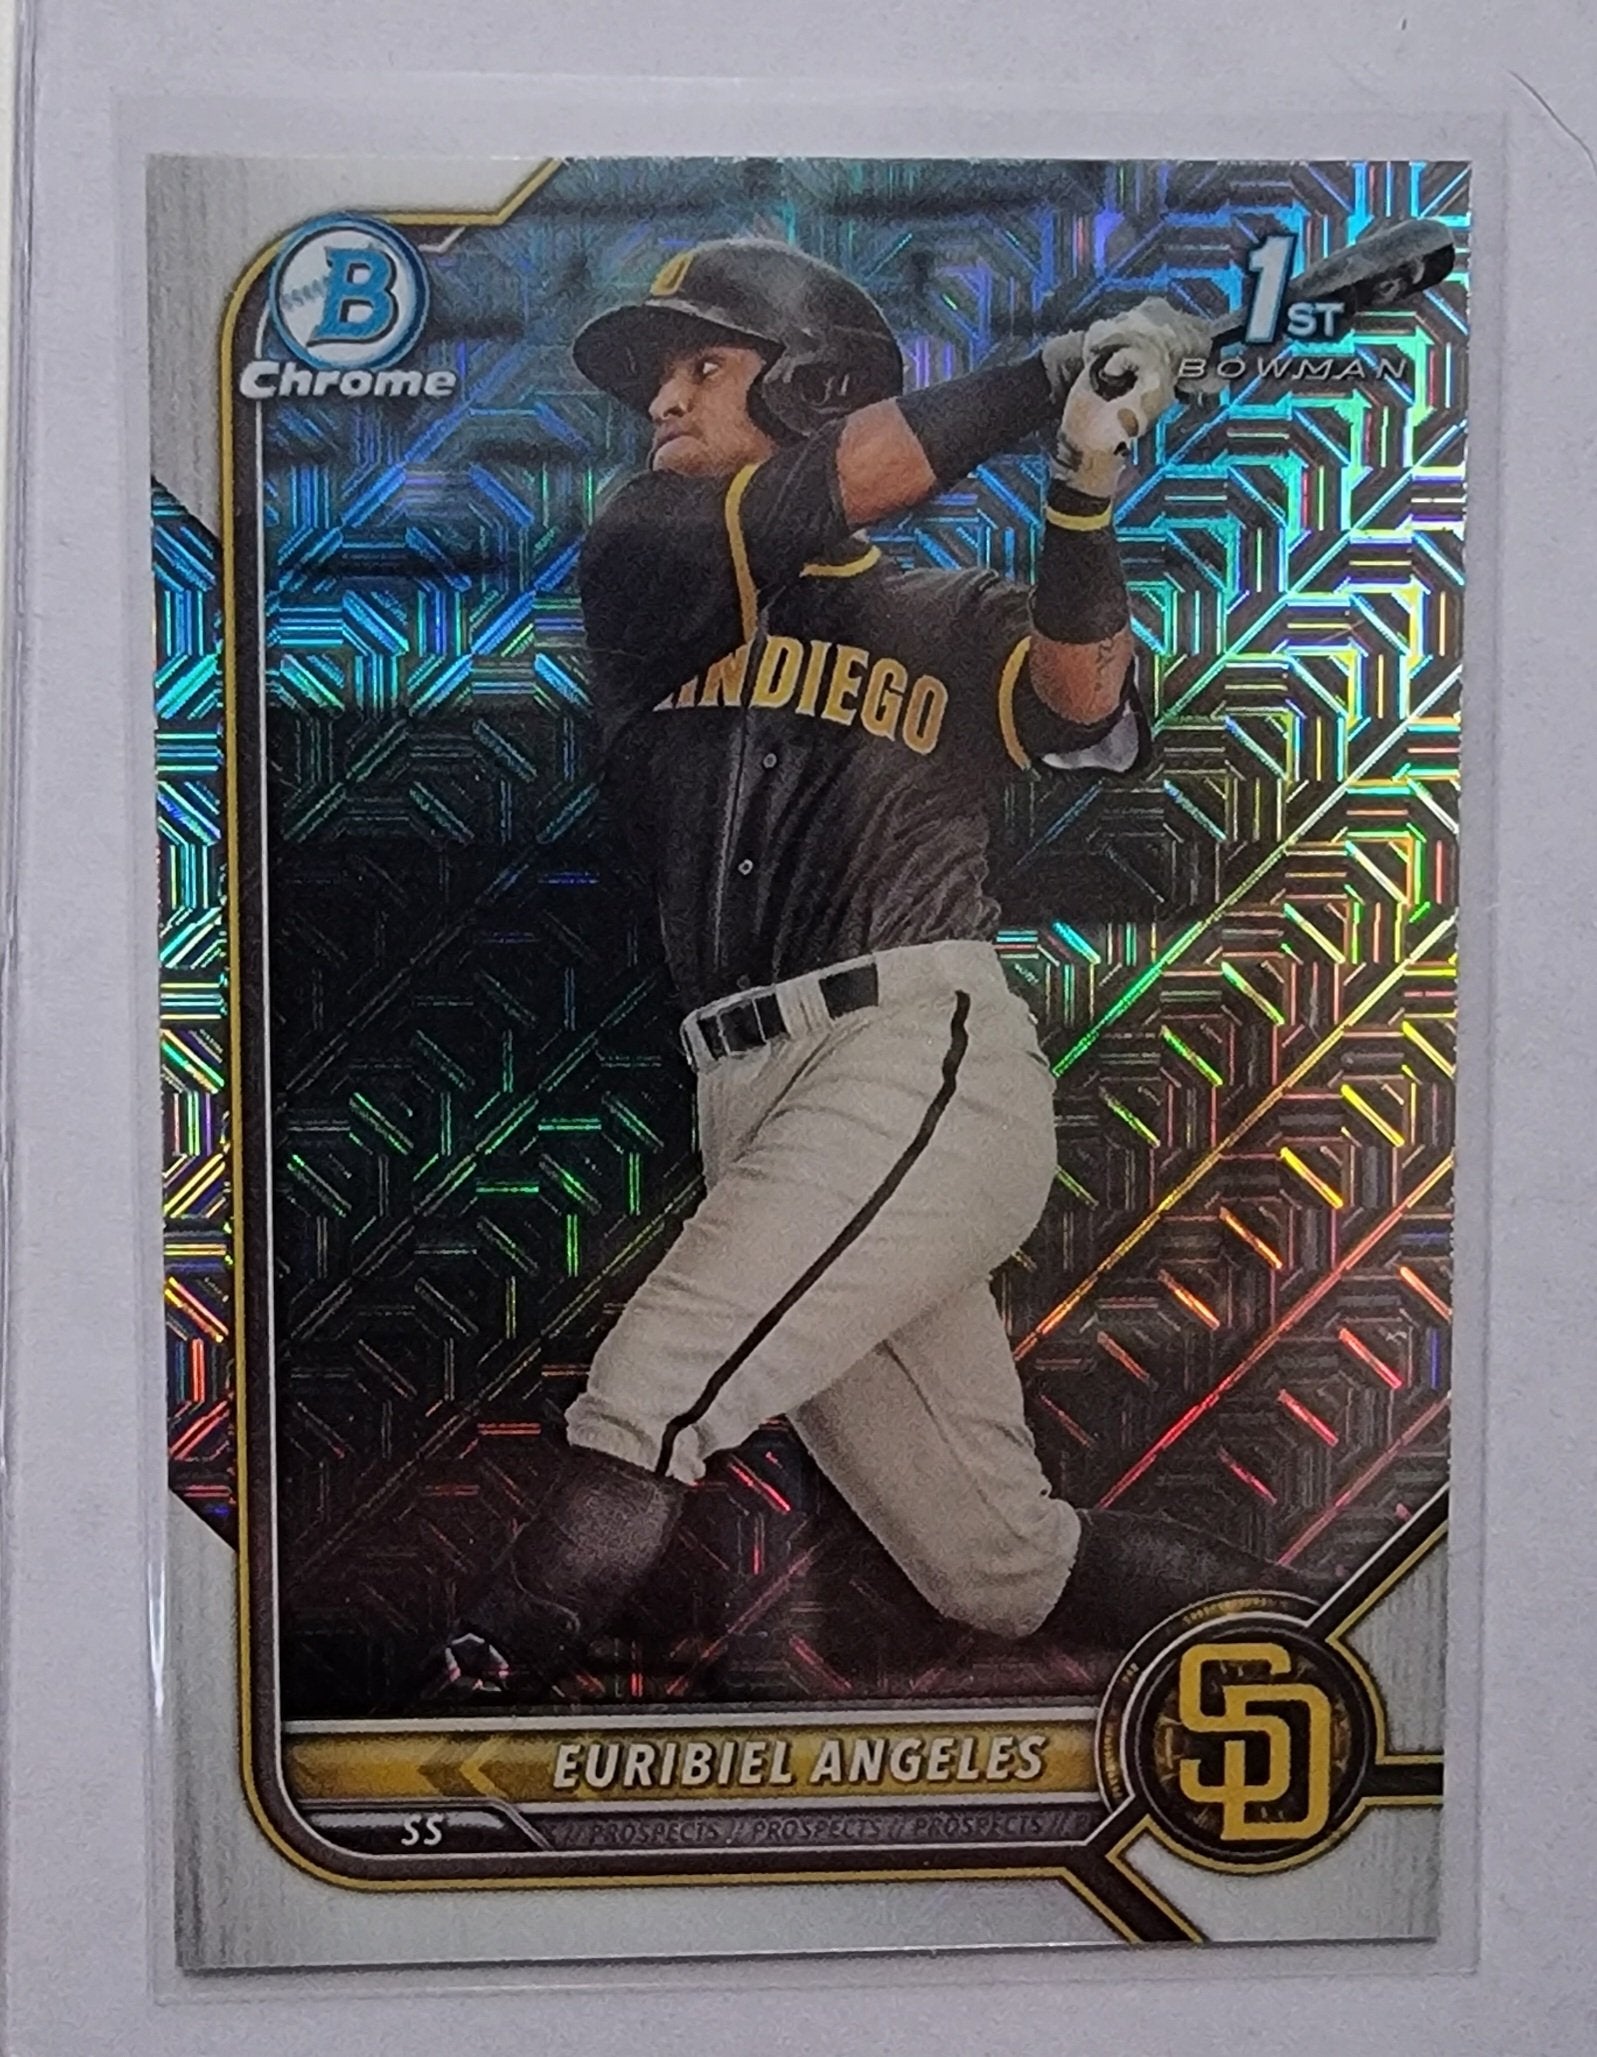 2022 Bowman Euribiel Angeles Mojo Refractor Baseball Card AVM1 simple Xclusive Collectibles   